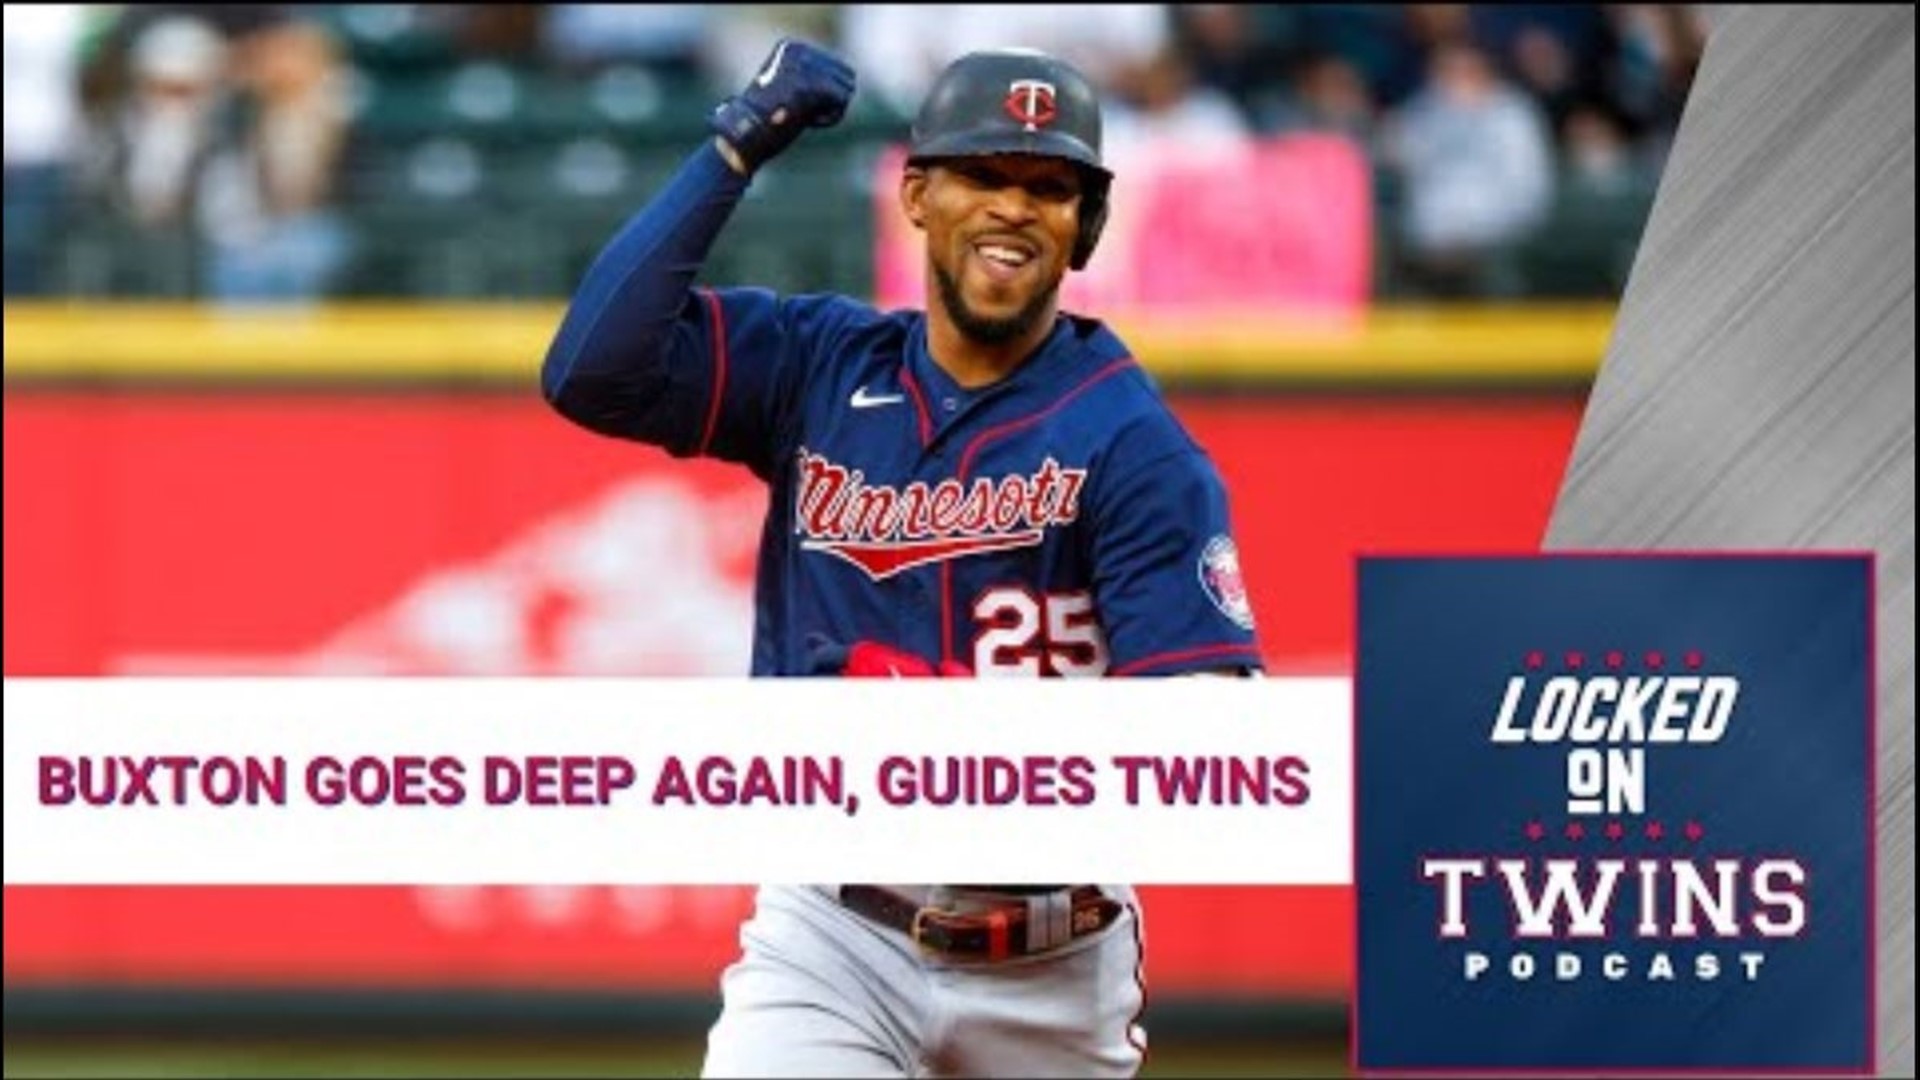 Byron Buxton hit a crucial two-run homer in the first inning of Monday's Minnesota Twins win over the Seattle Mariners.